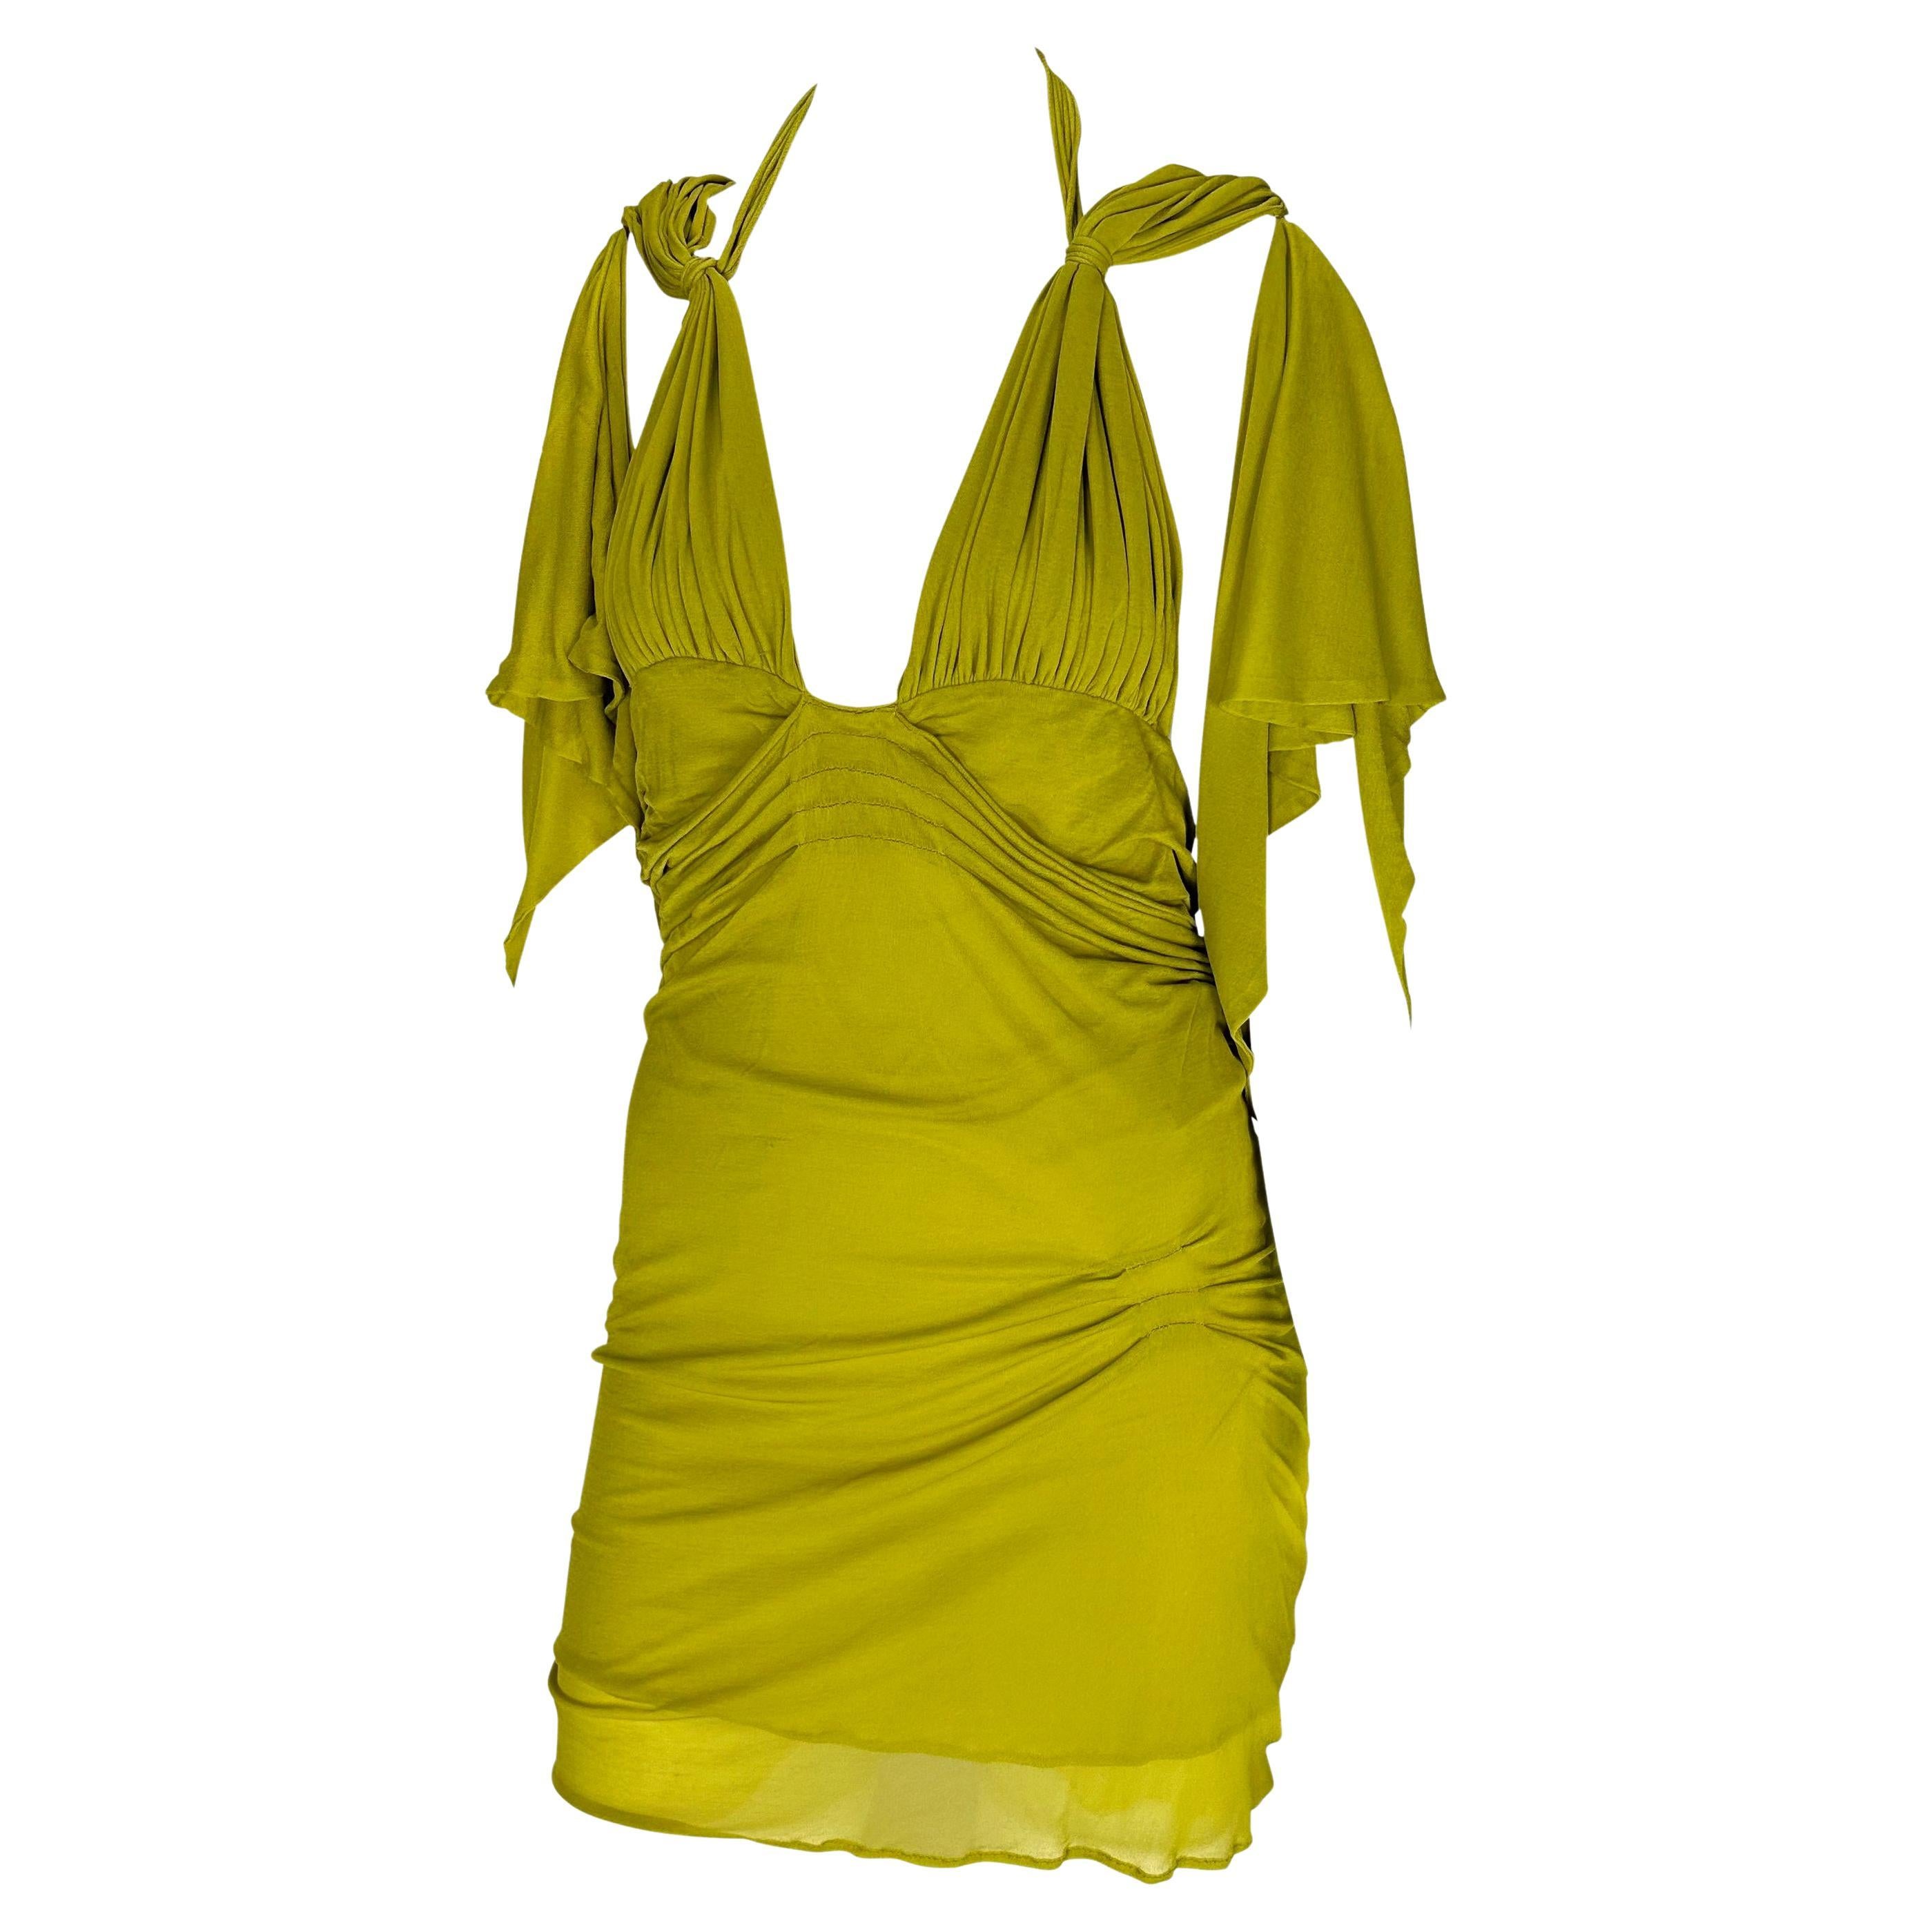 Presenting a fabulous green silk Gucci mini dress, designed by Tom Ford. From the Spring/Summer 2003 collection, this unique dress features areas of ruching and pleating throughout, flowy sleeves, and an exposed back. Never worn before, this sexy